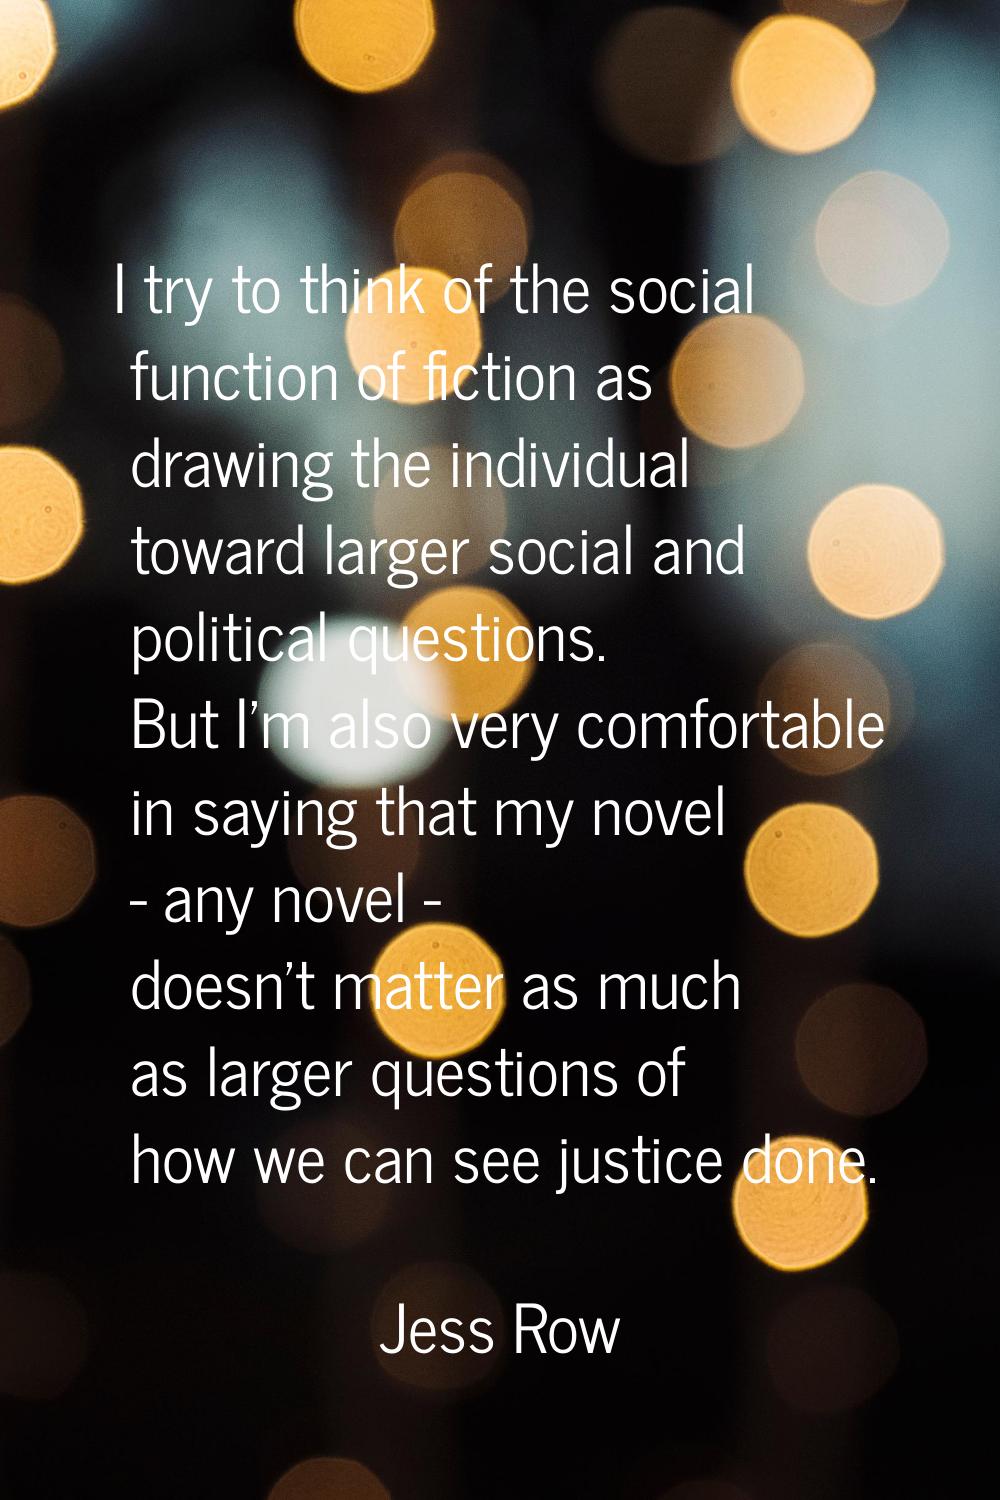 I try to think of the social function of fiction as drawing the individual toward larger social and